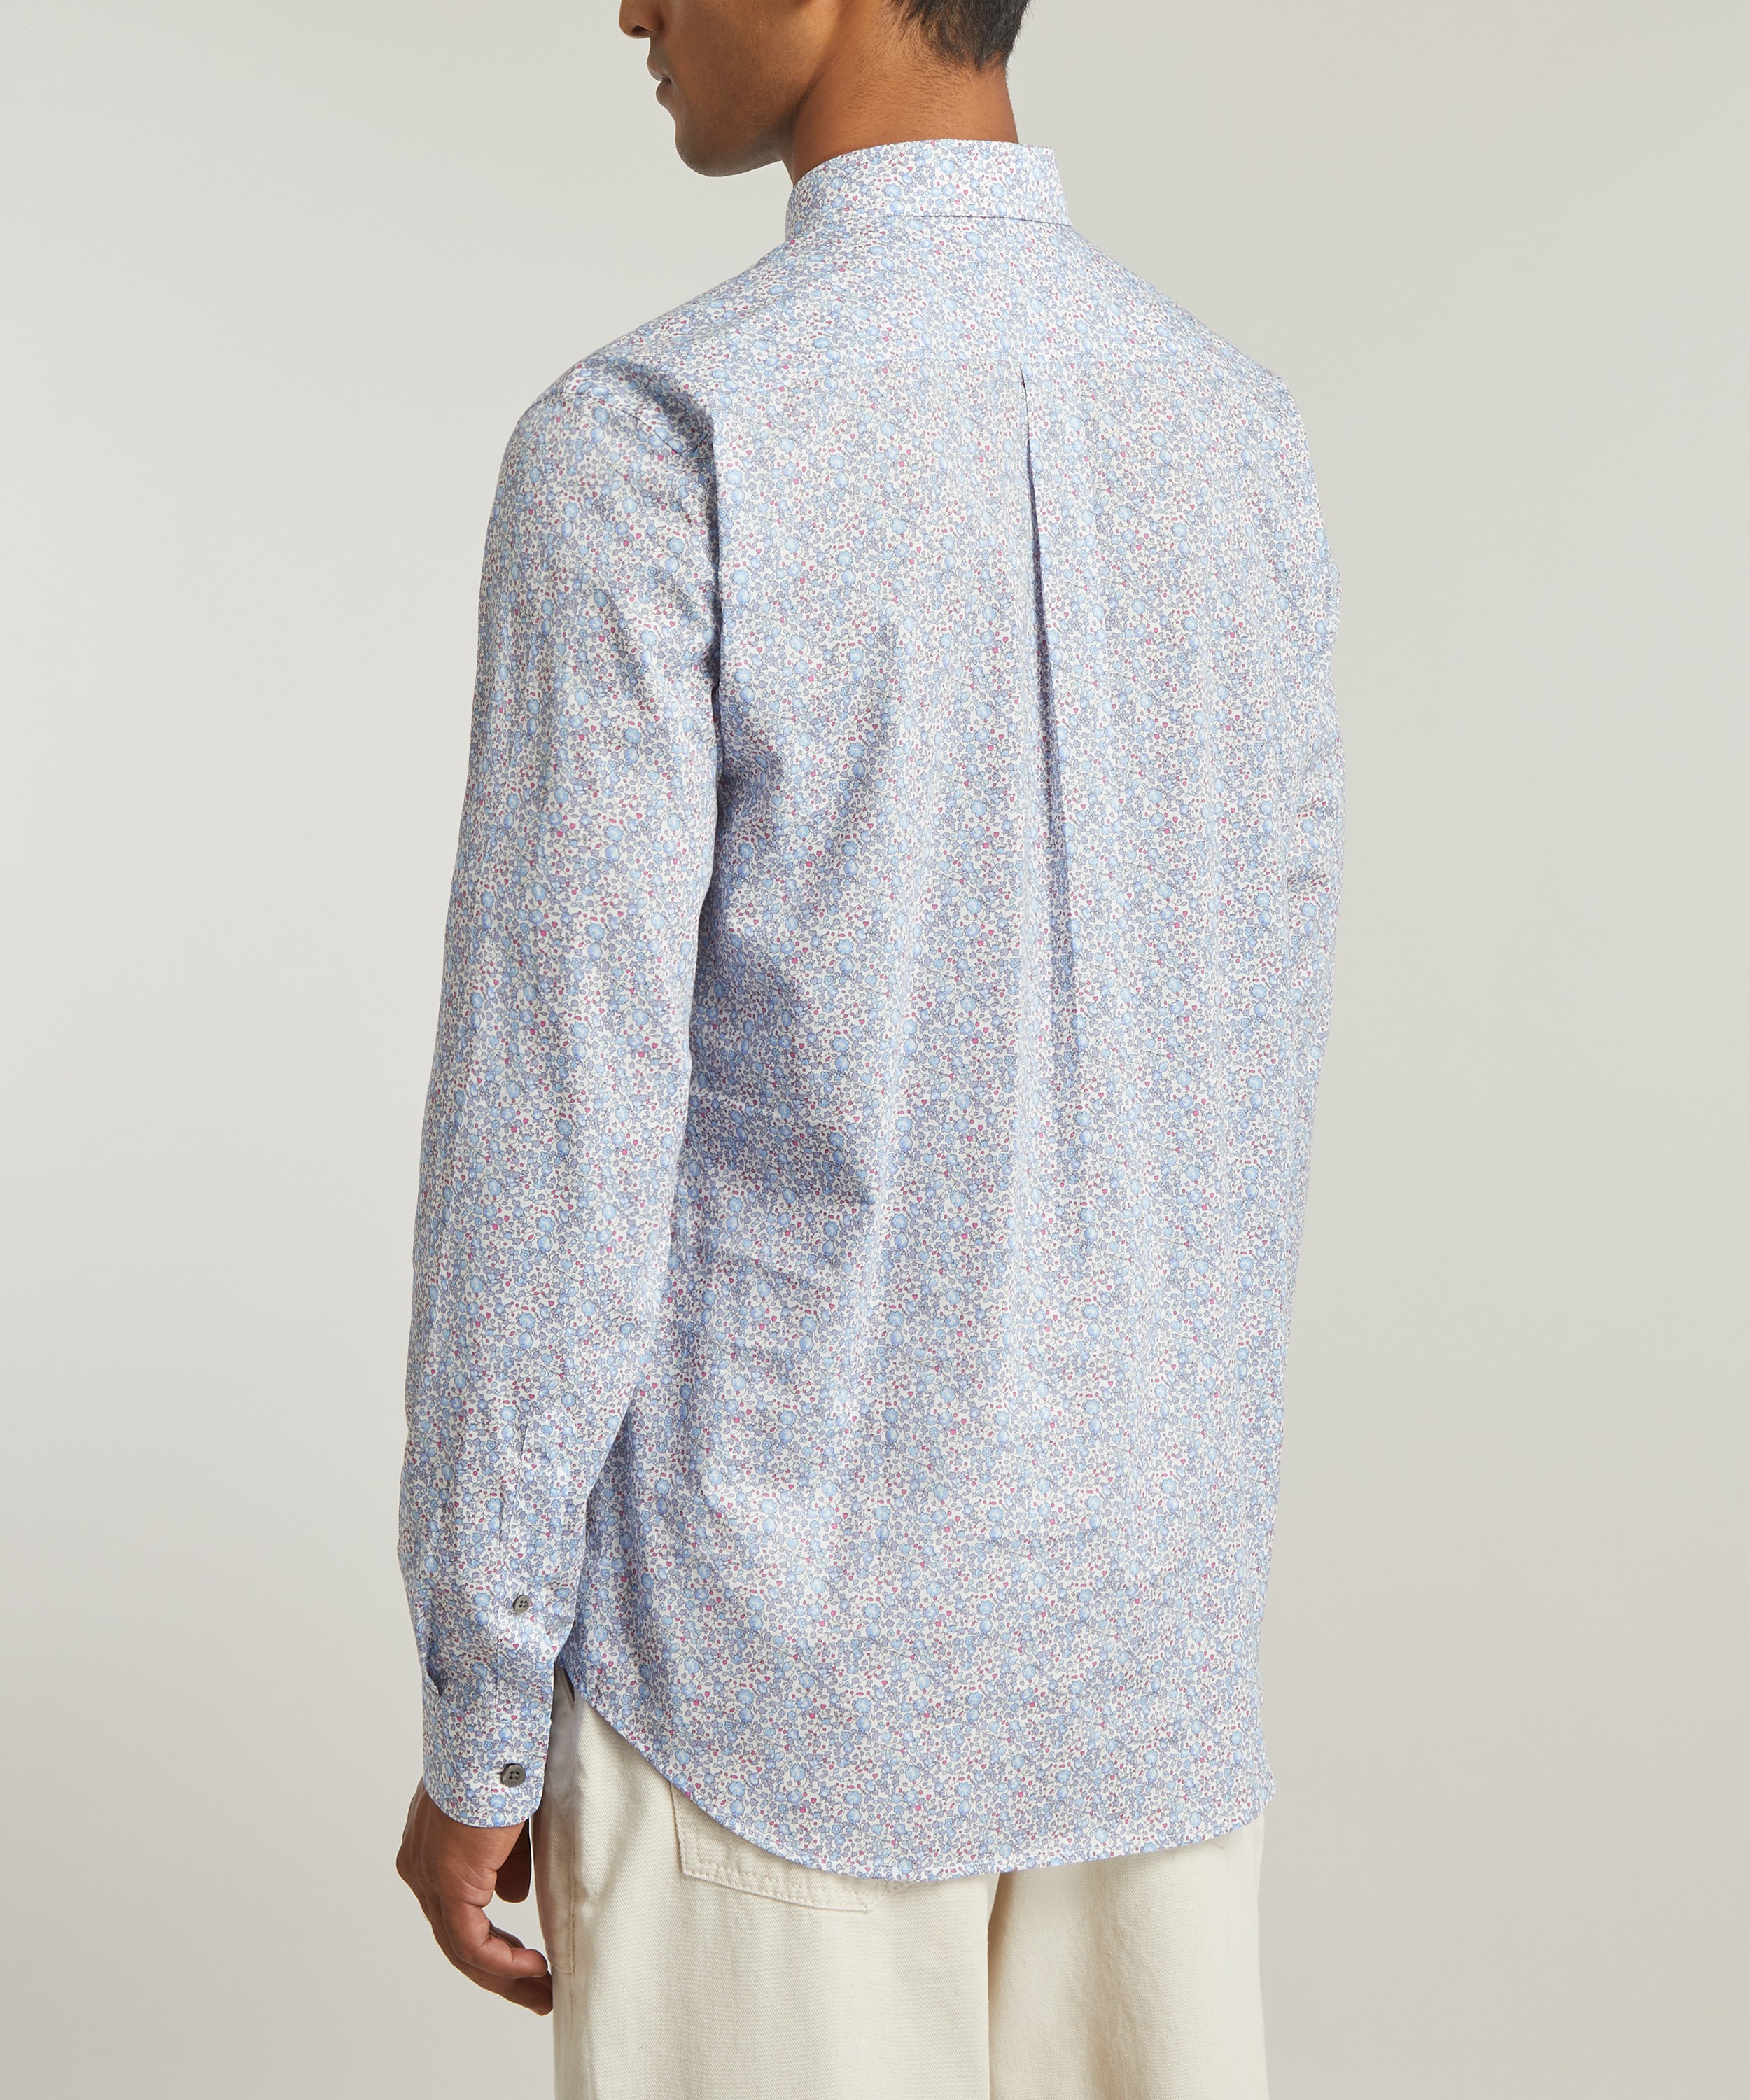 Liberty - Eloise Tana Lawn™ Cotton Casual Classic Shirt image number 3